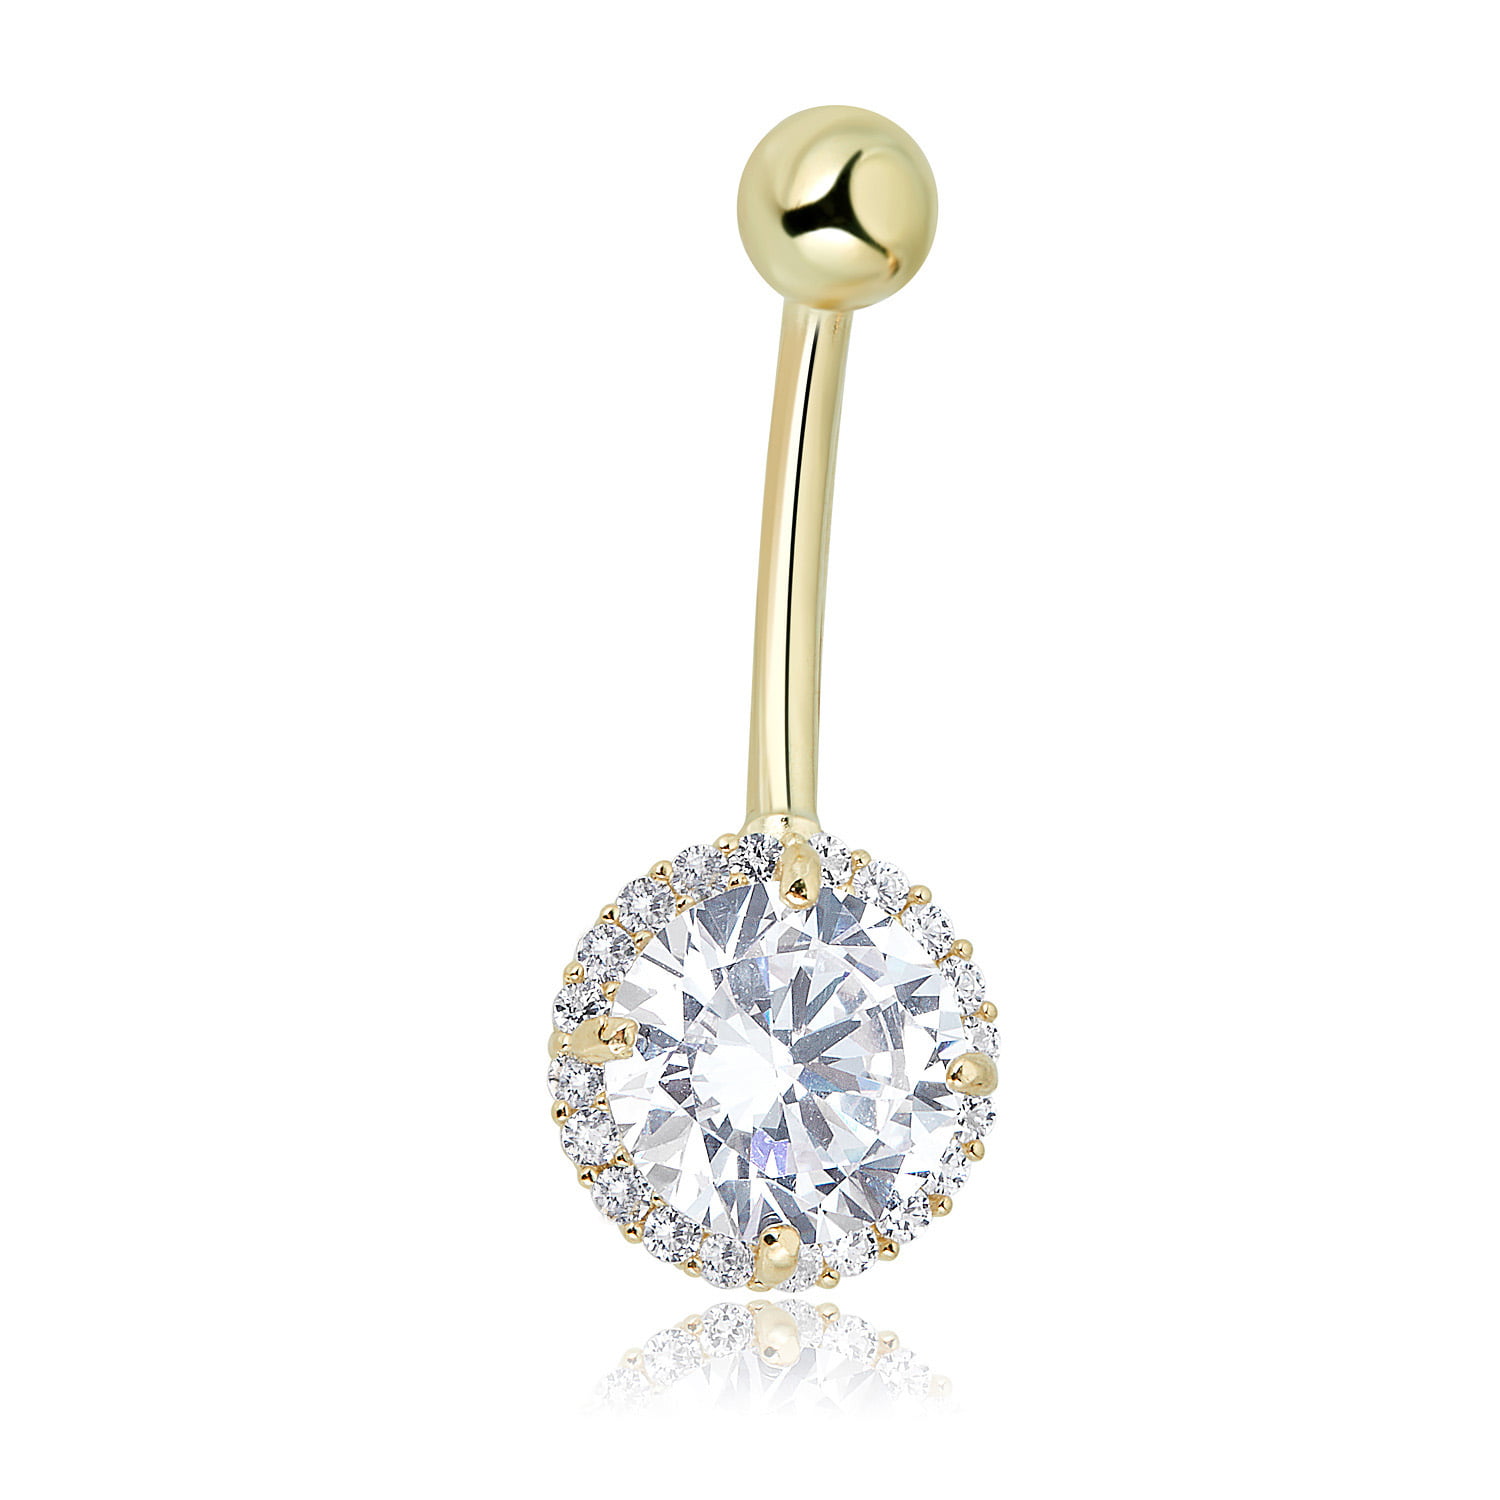 Solid 9ct White Gold NEW Belly Bar with Simulated Diamond Solitaire 